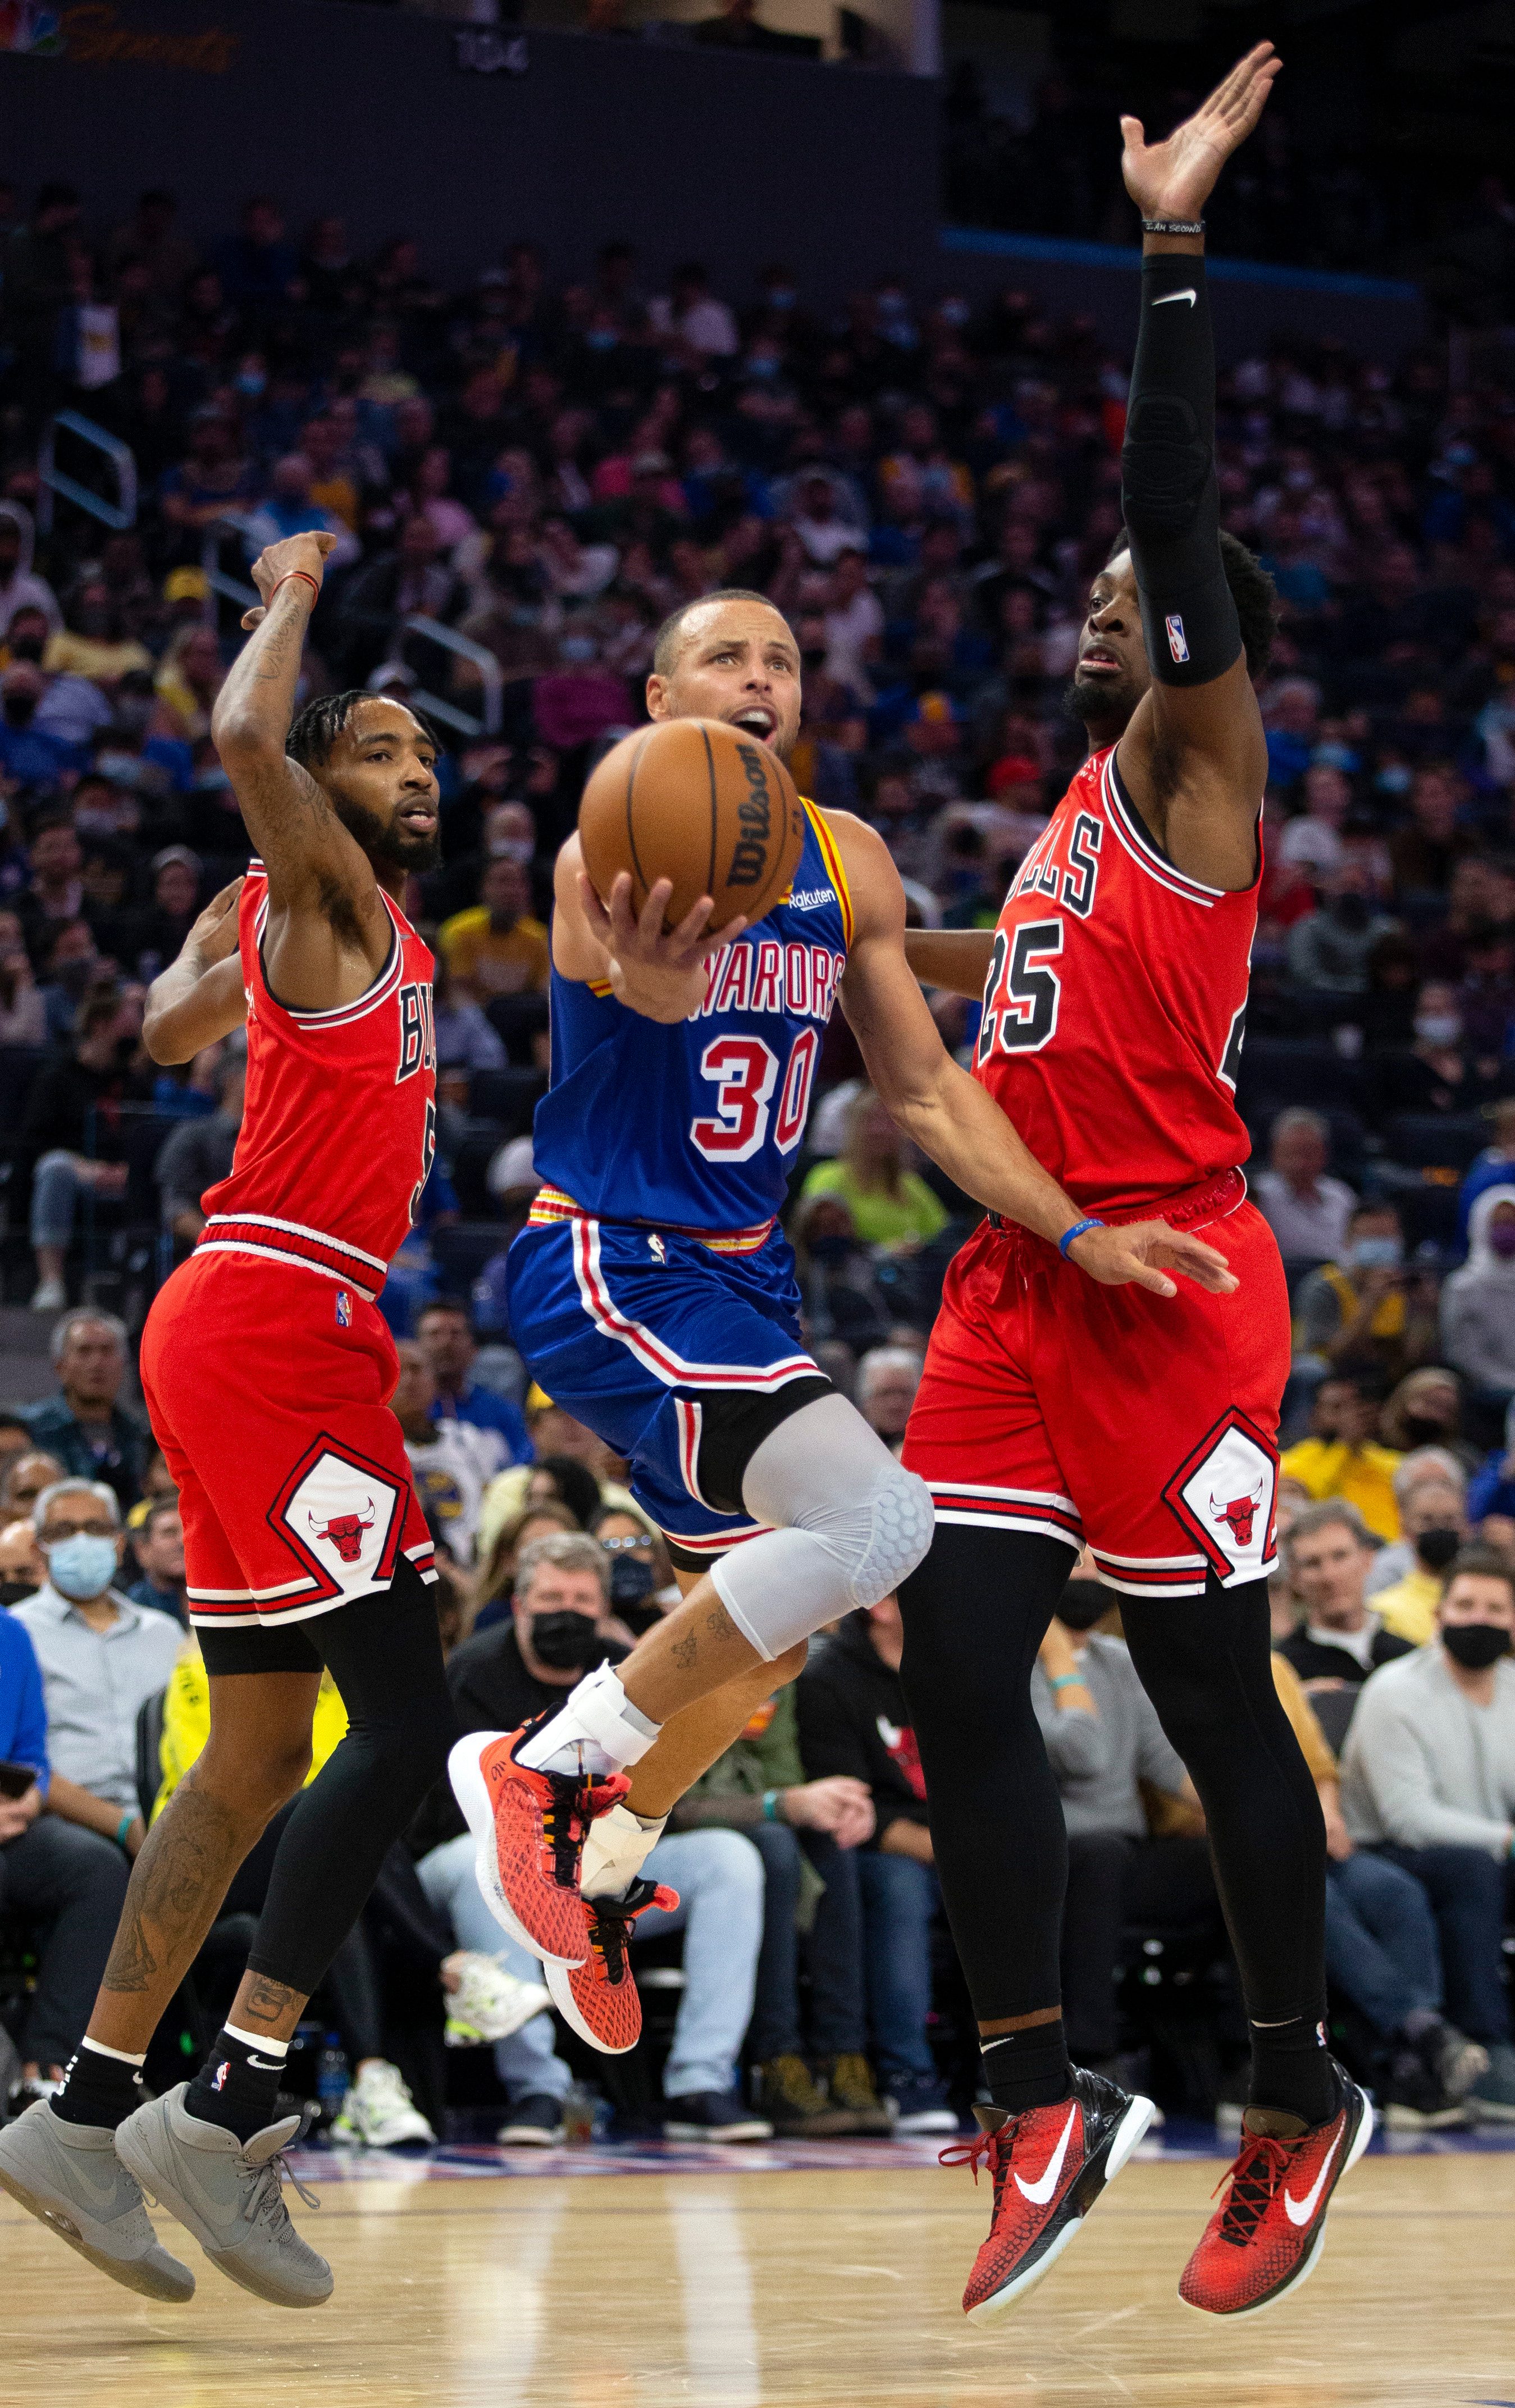 Steph Curry’s 40-point night carries Warriors past Bulls